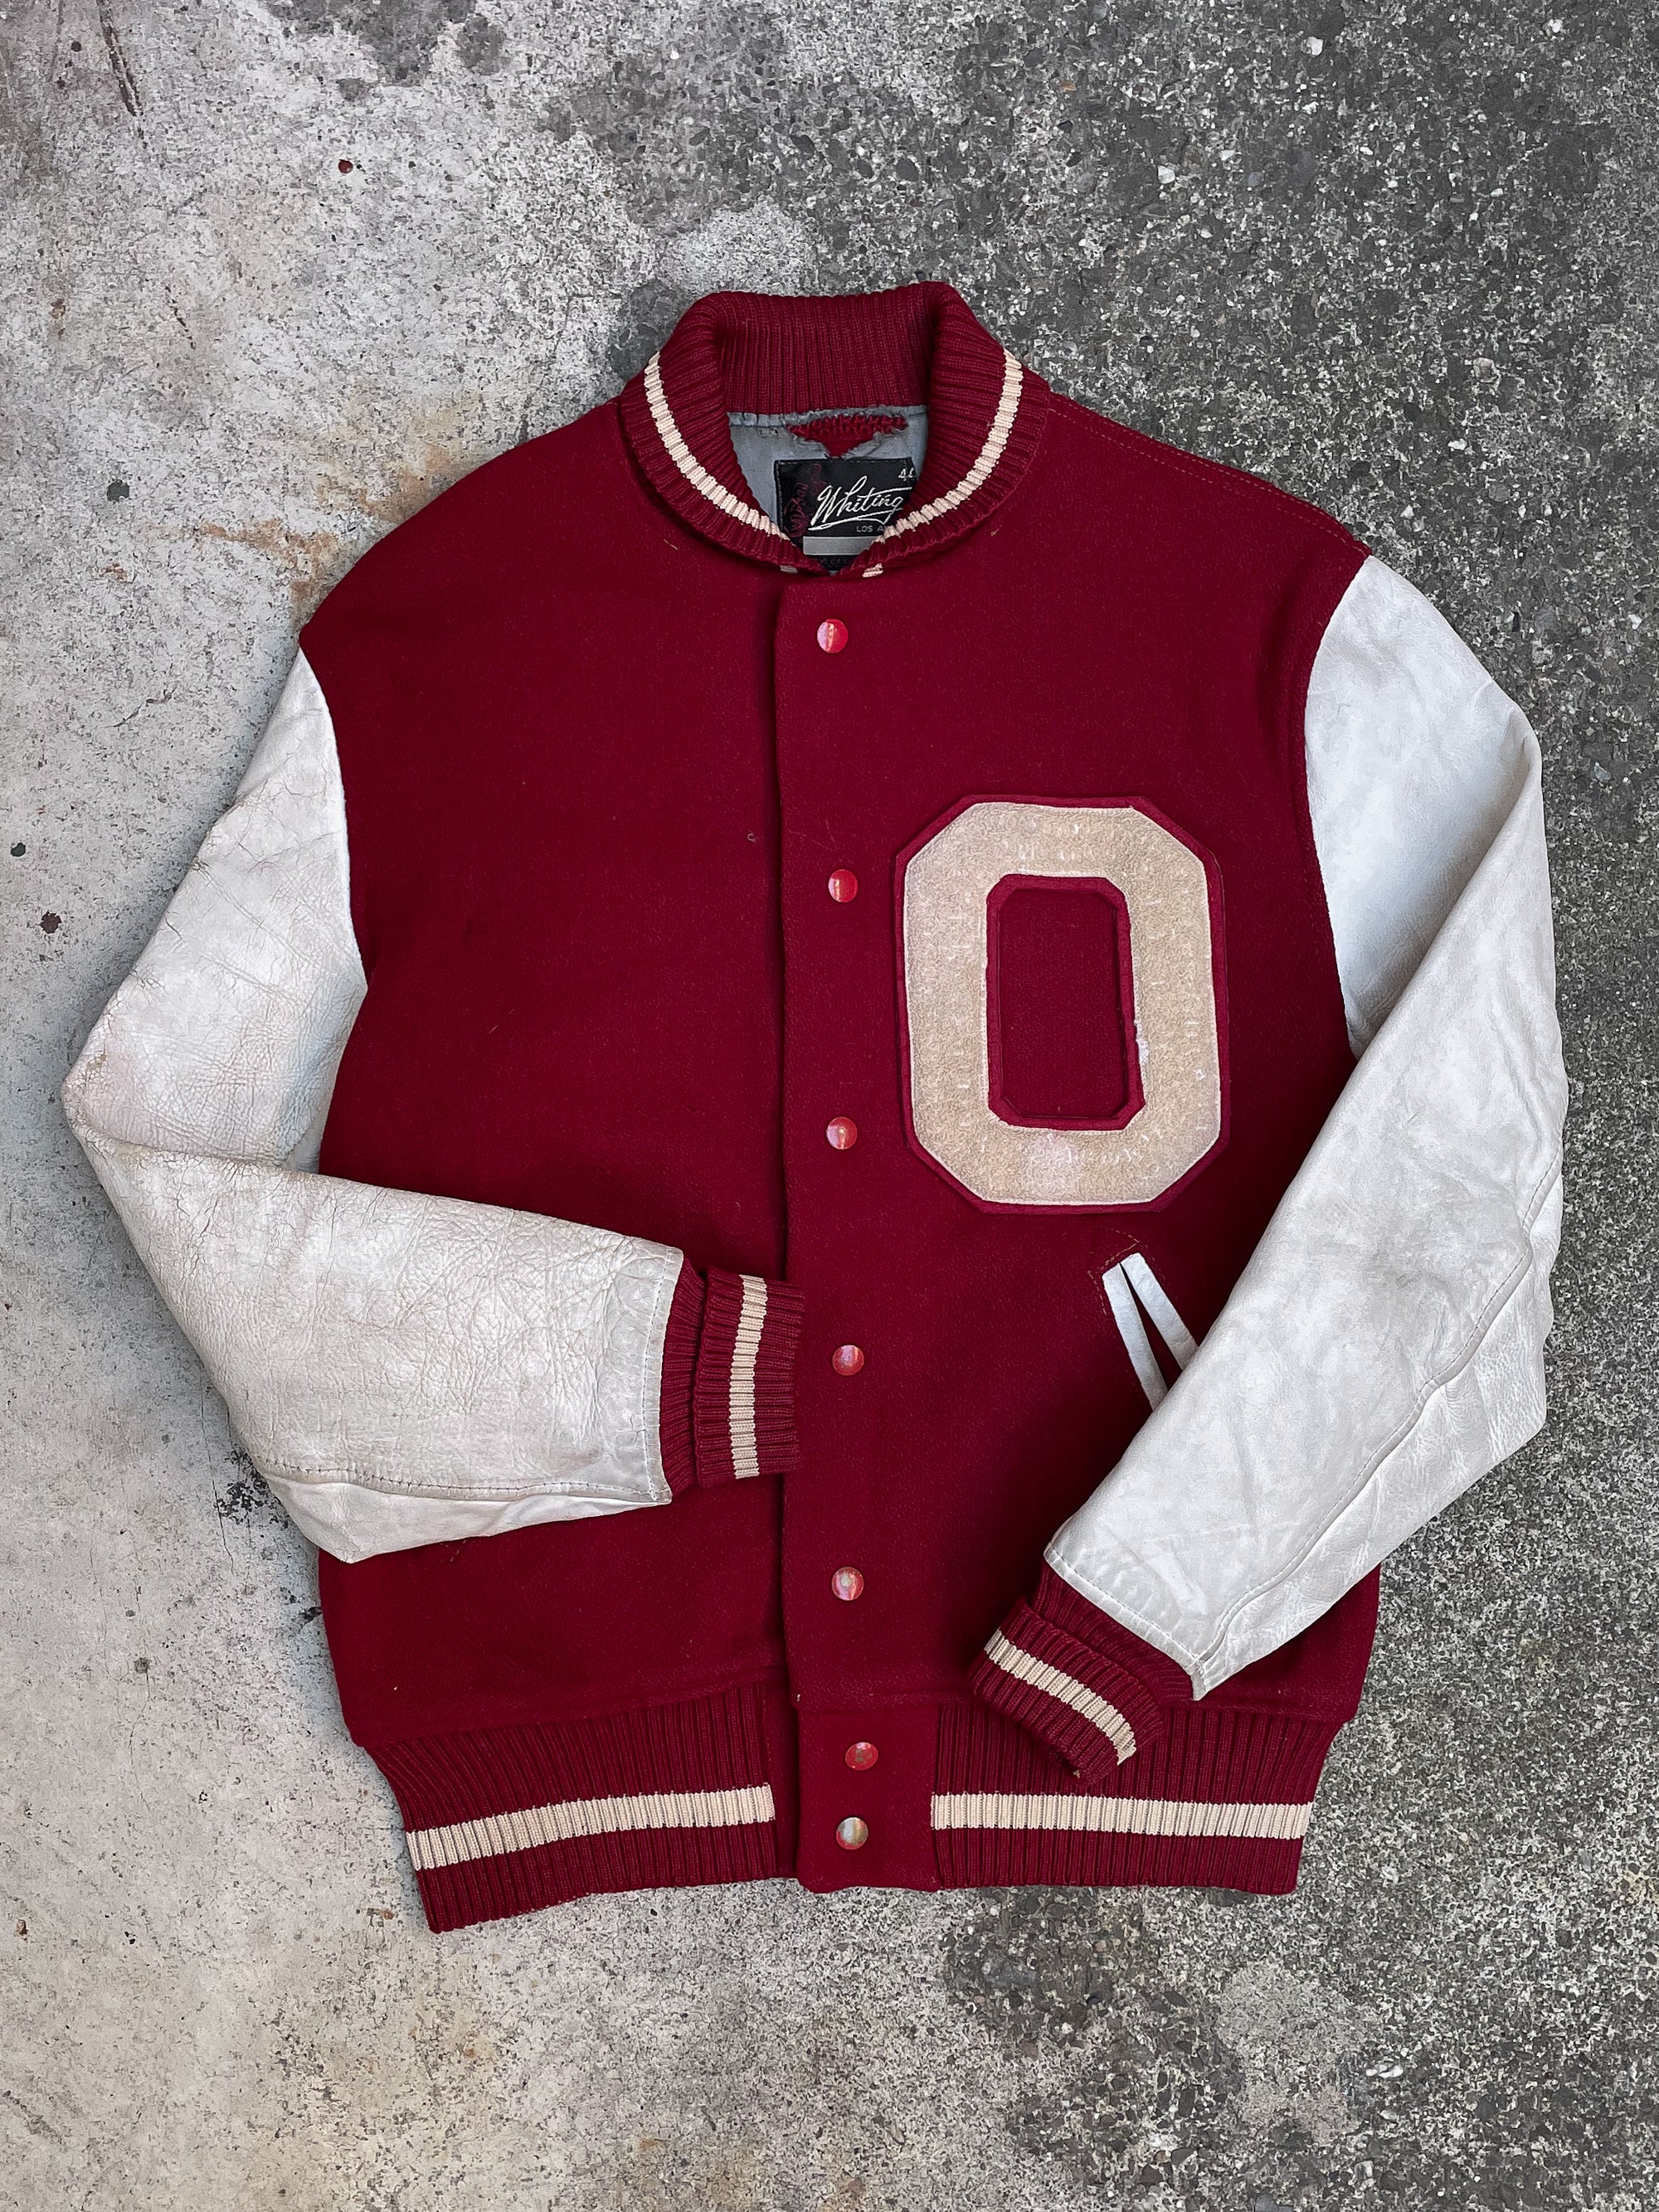 1970s Red Wool “O” Leather Varsity Letterman Jacket (M)